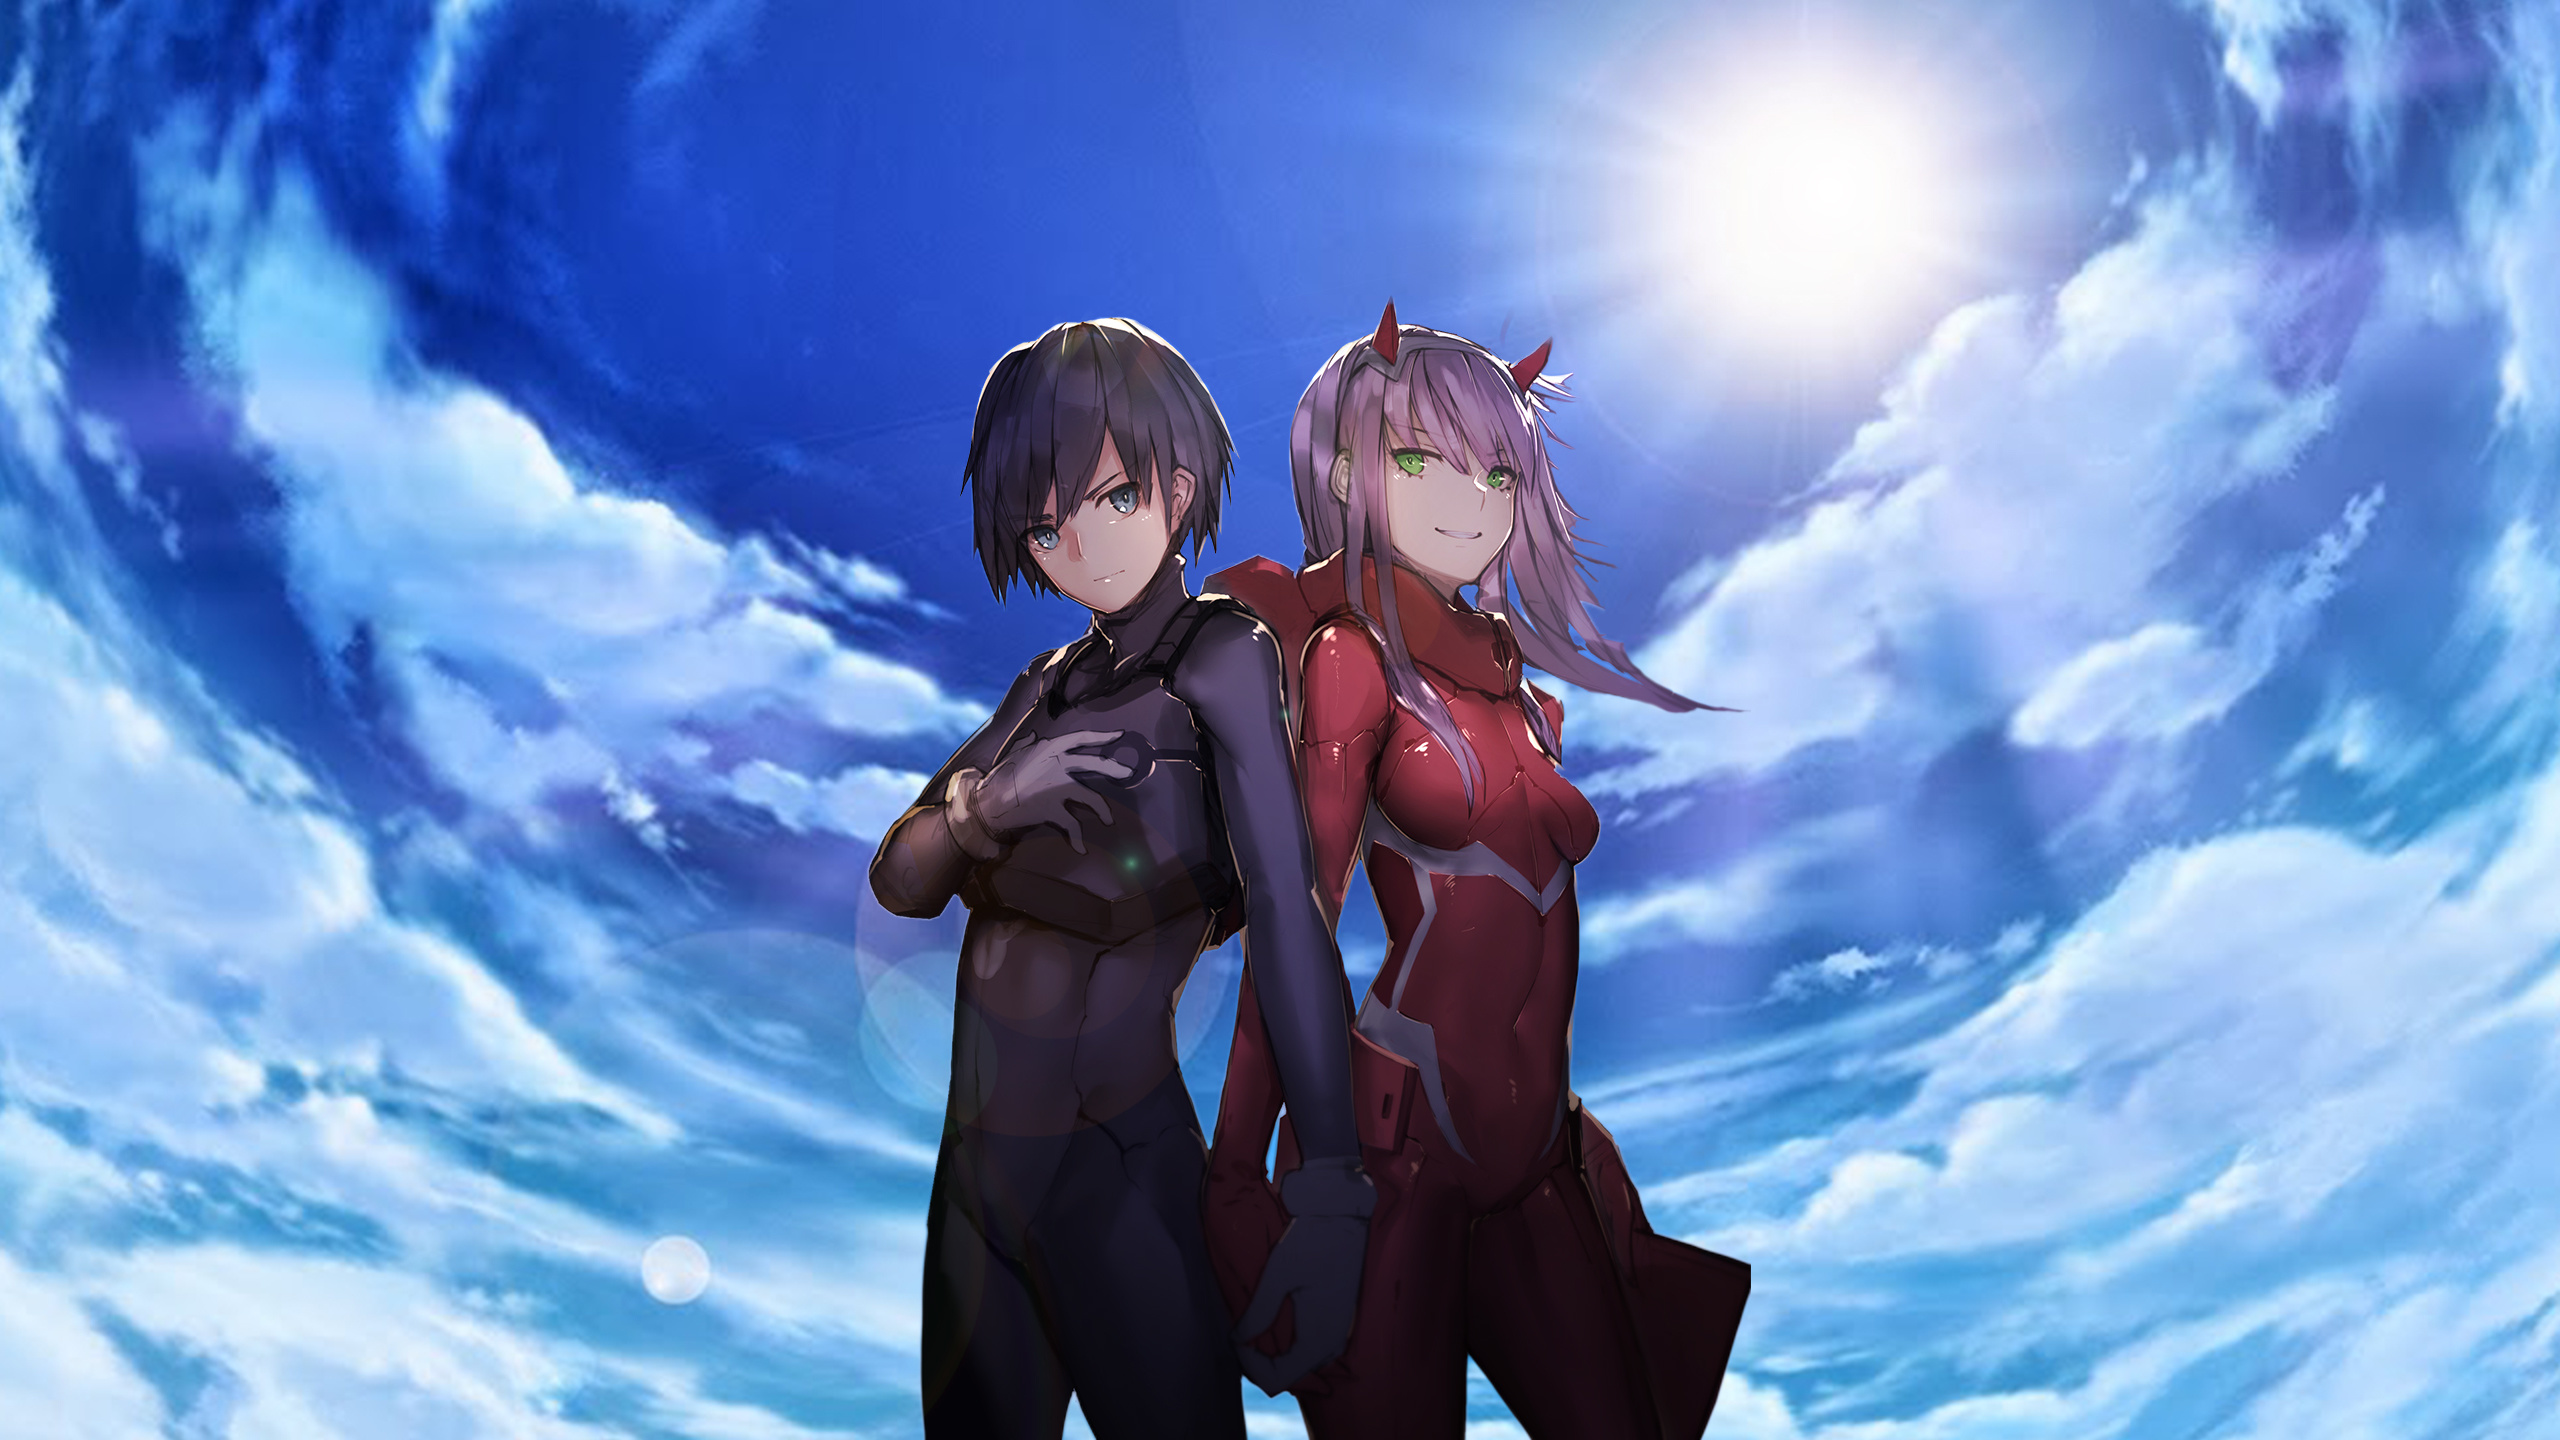 Download wallpaper 2560x1440 hiro and zero two, anime, happy, couple, dual  wide 16:9 2560x1440 hd background, 8169